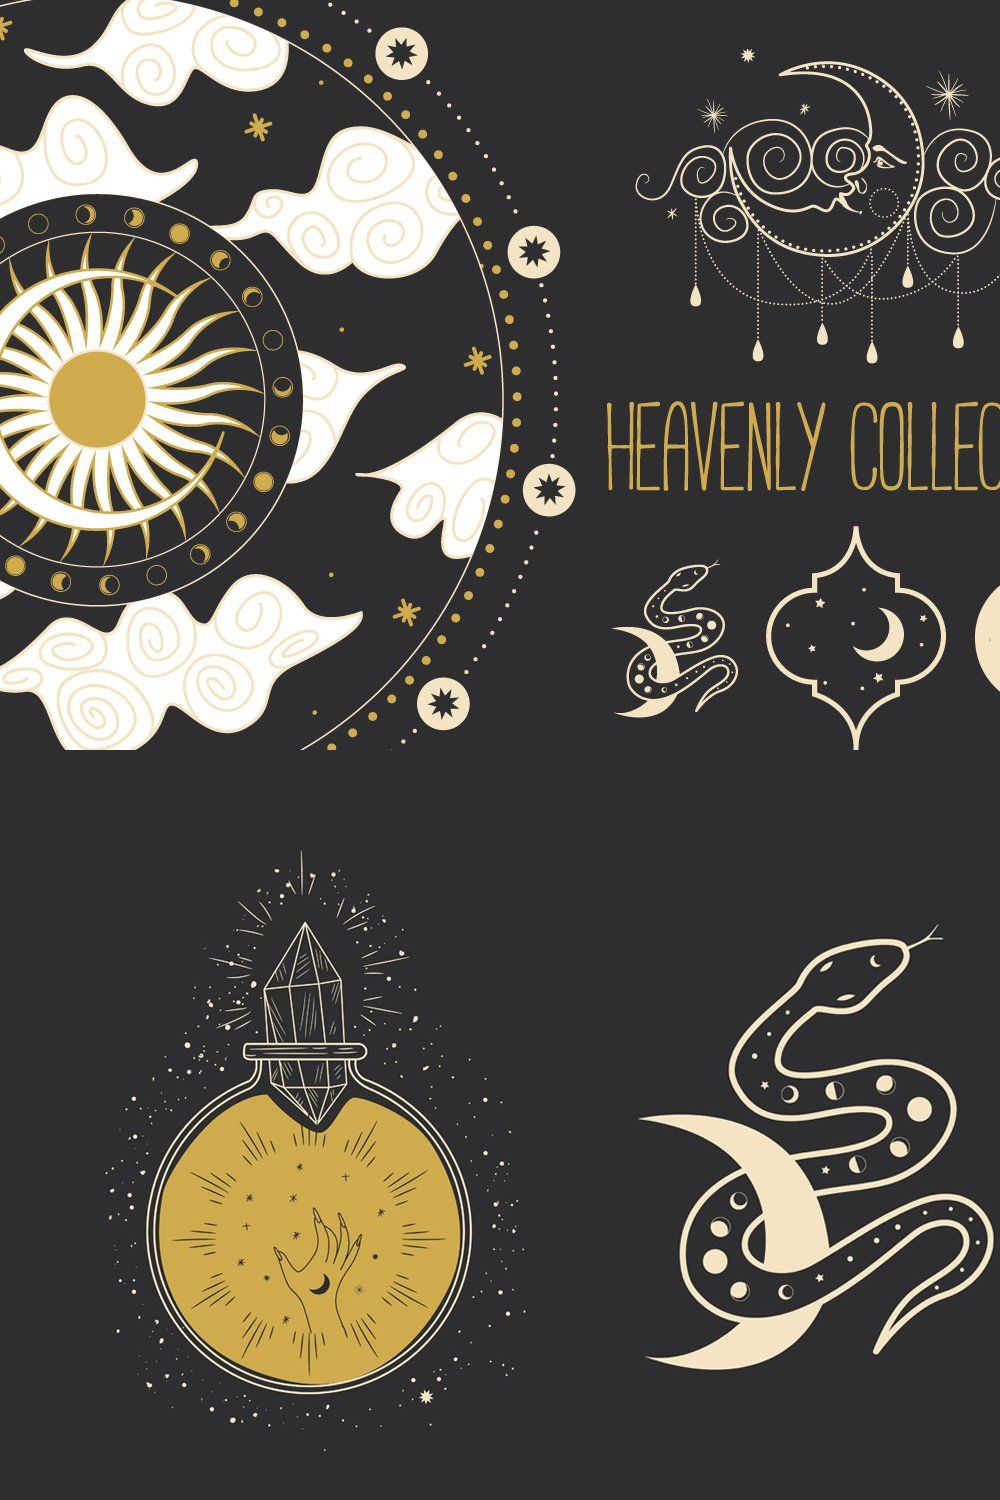 Heavenly collection pinterest preview image.